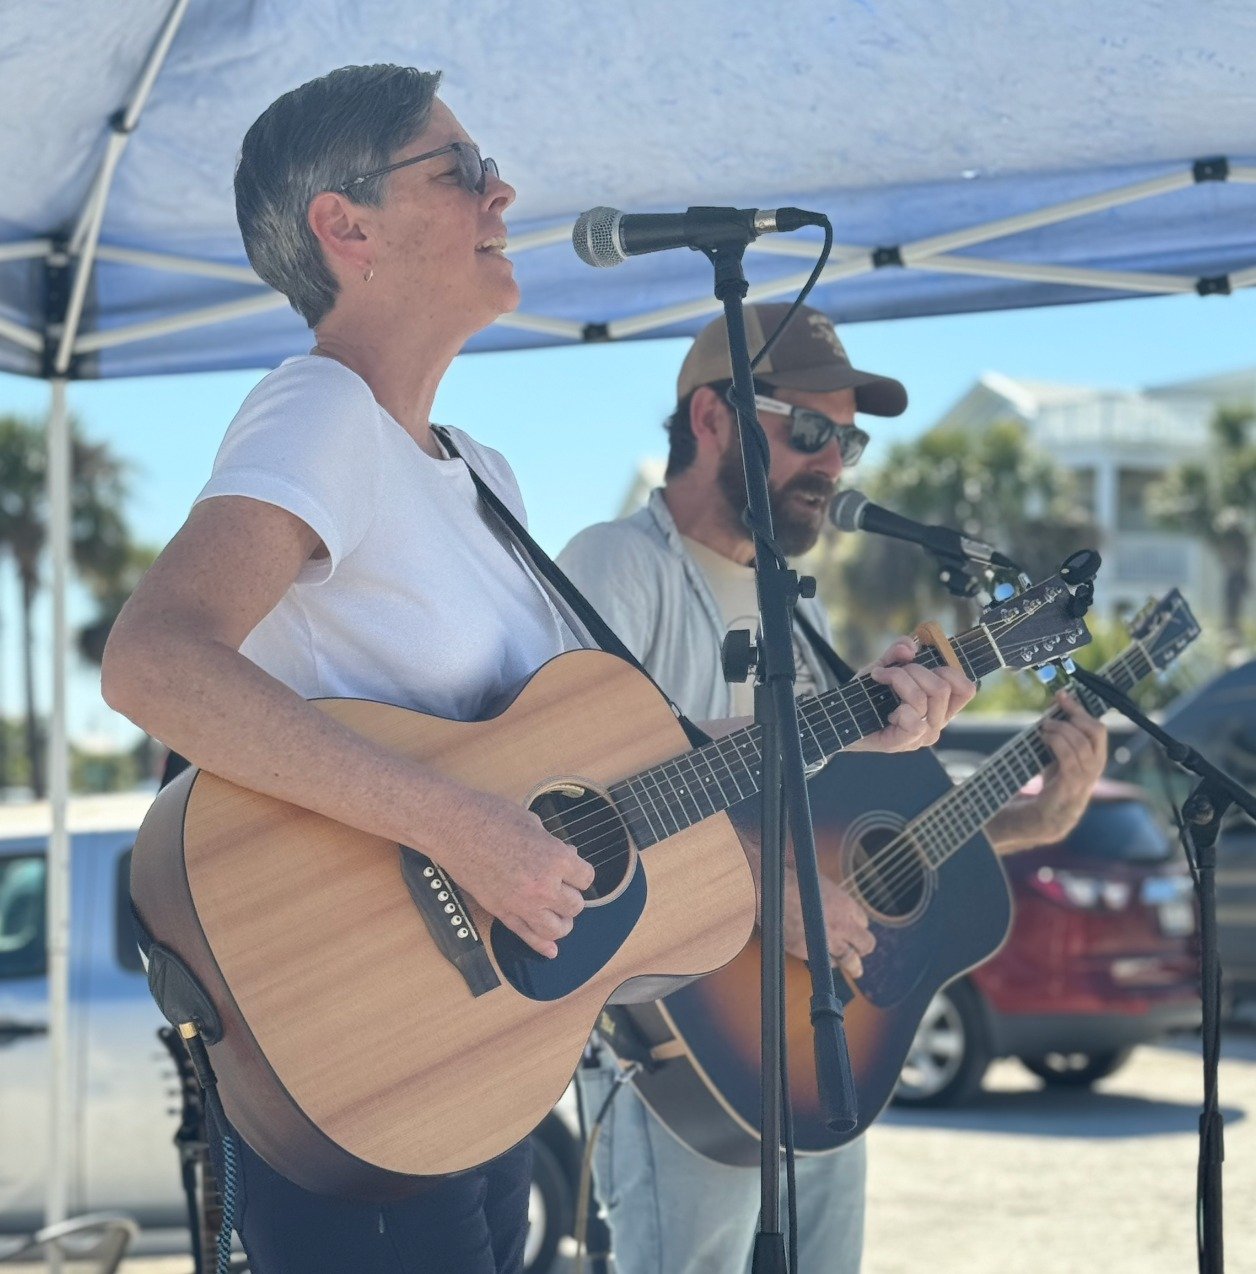 Here's another shot from the Isle of Palms Songwriter's Festival, with Becca in focus because today's her birthday! Everyone get in here and wish her happy birthday! 🥳